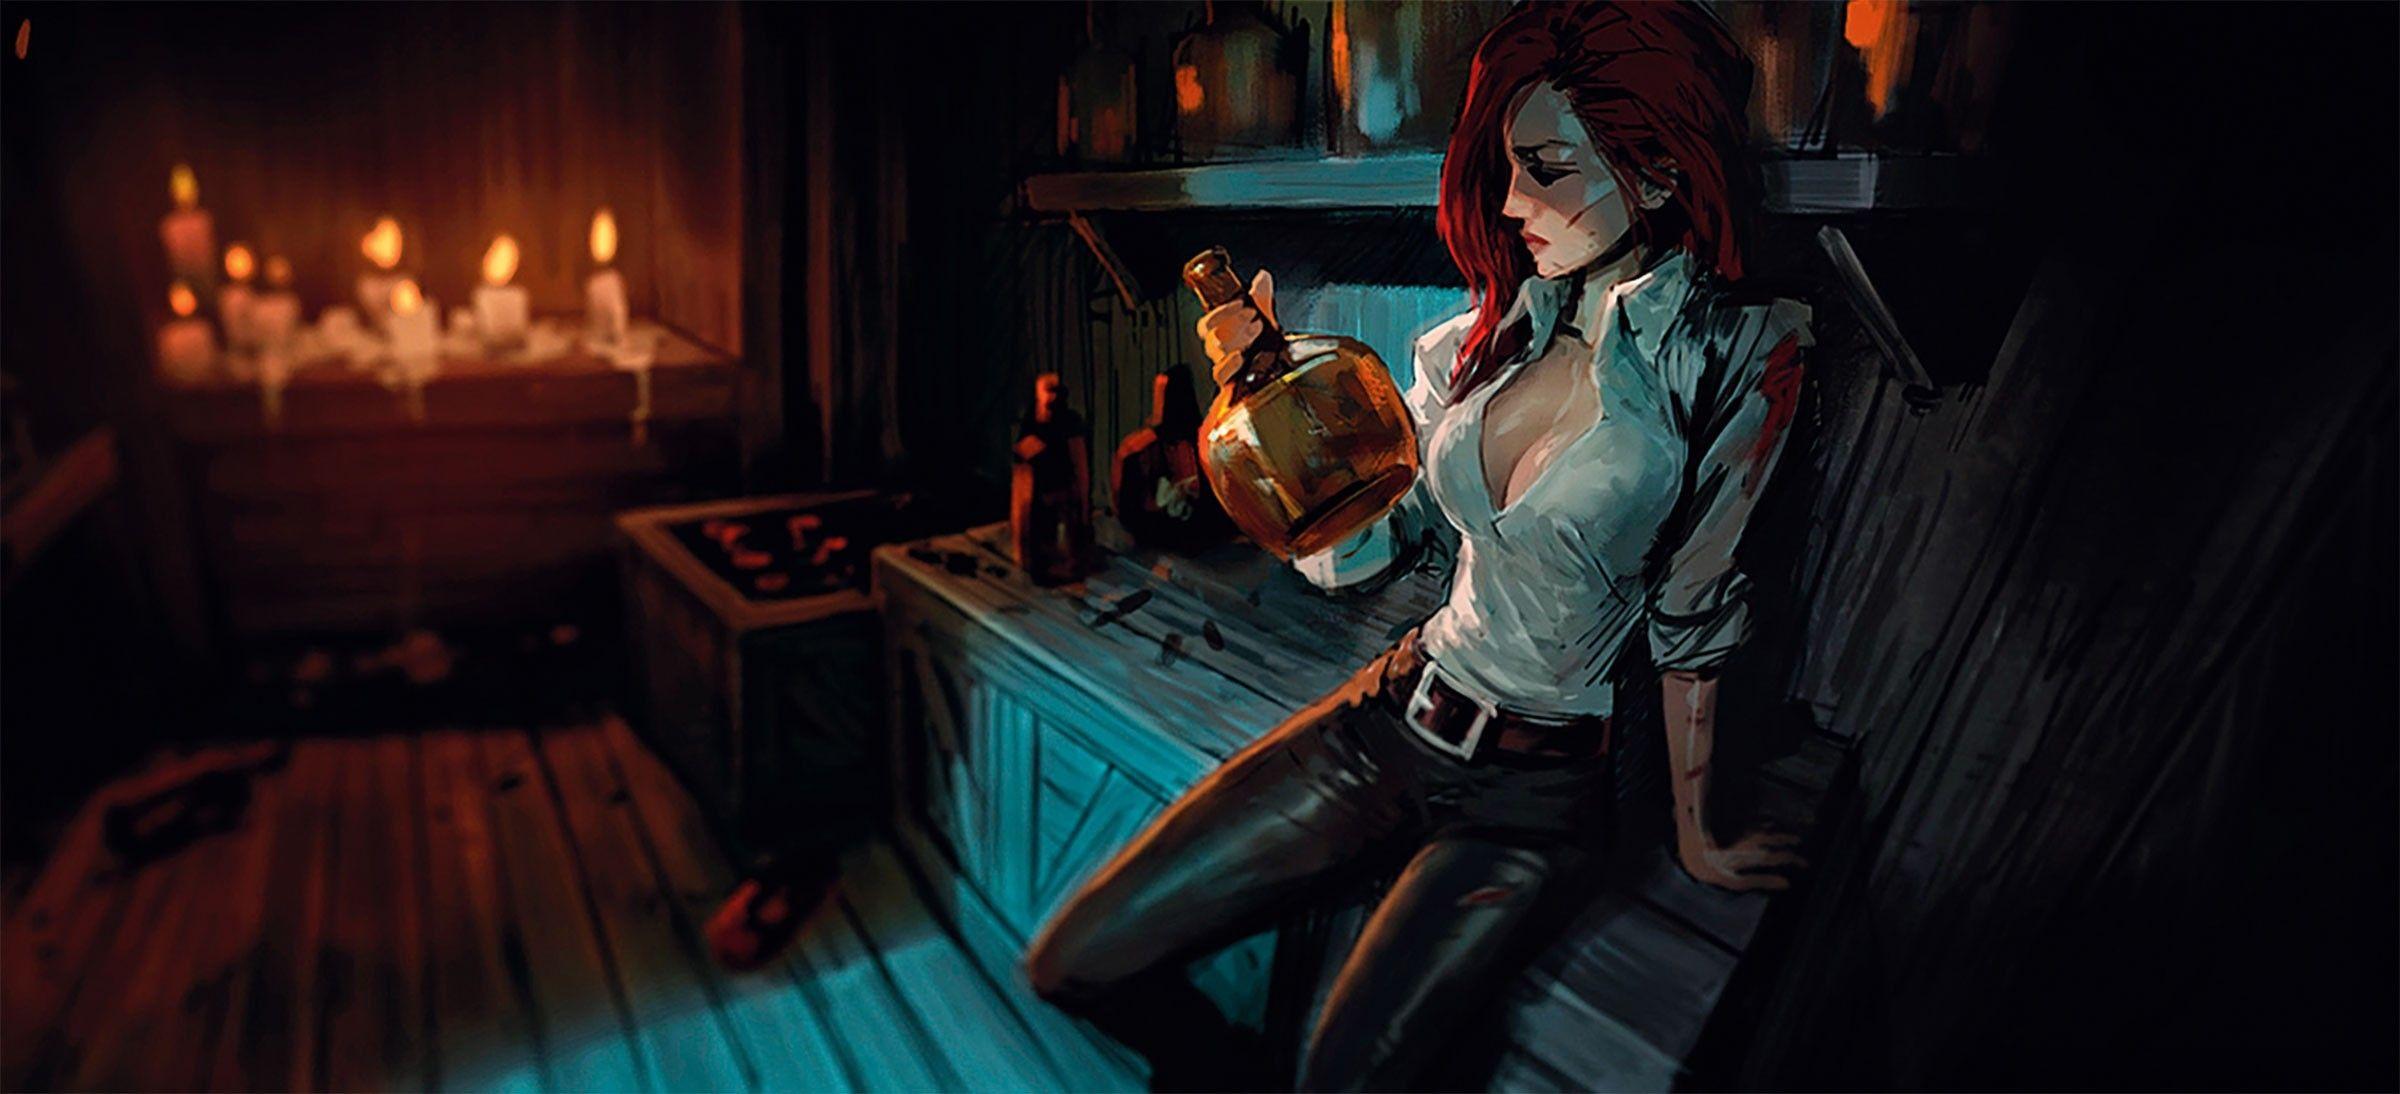 miss fortune wallpapers hd wallpaper cave miss fortune wallpapers hd wallpaper cave